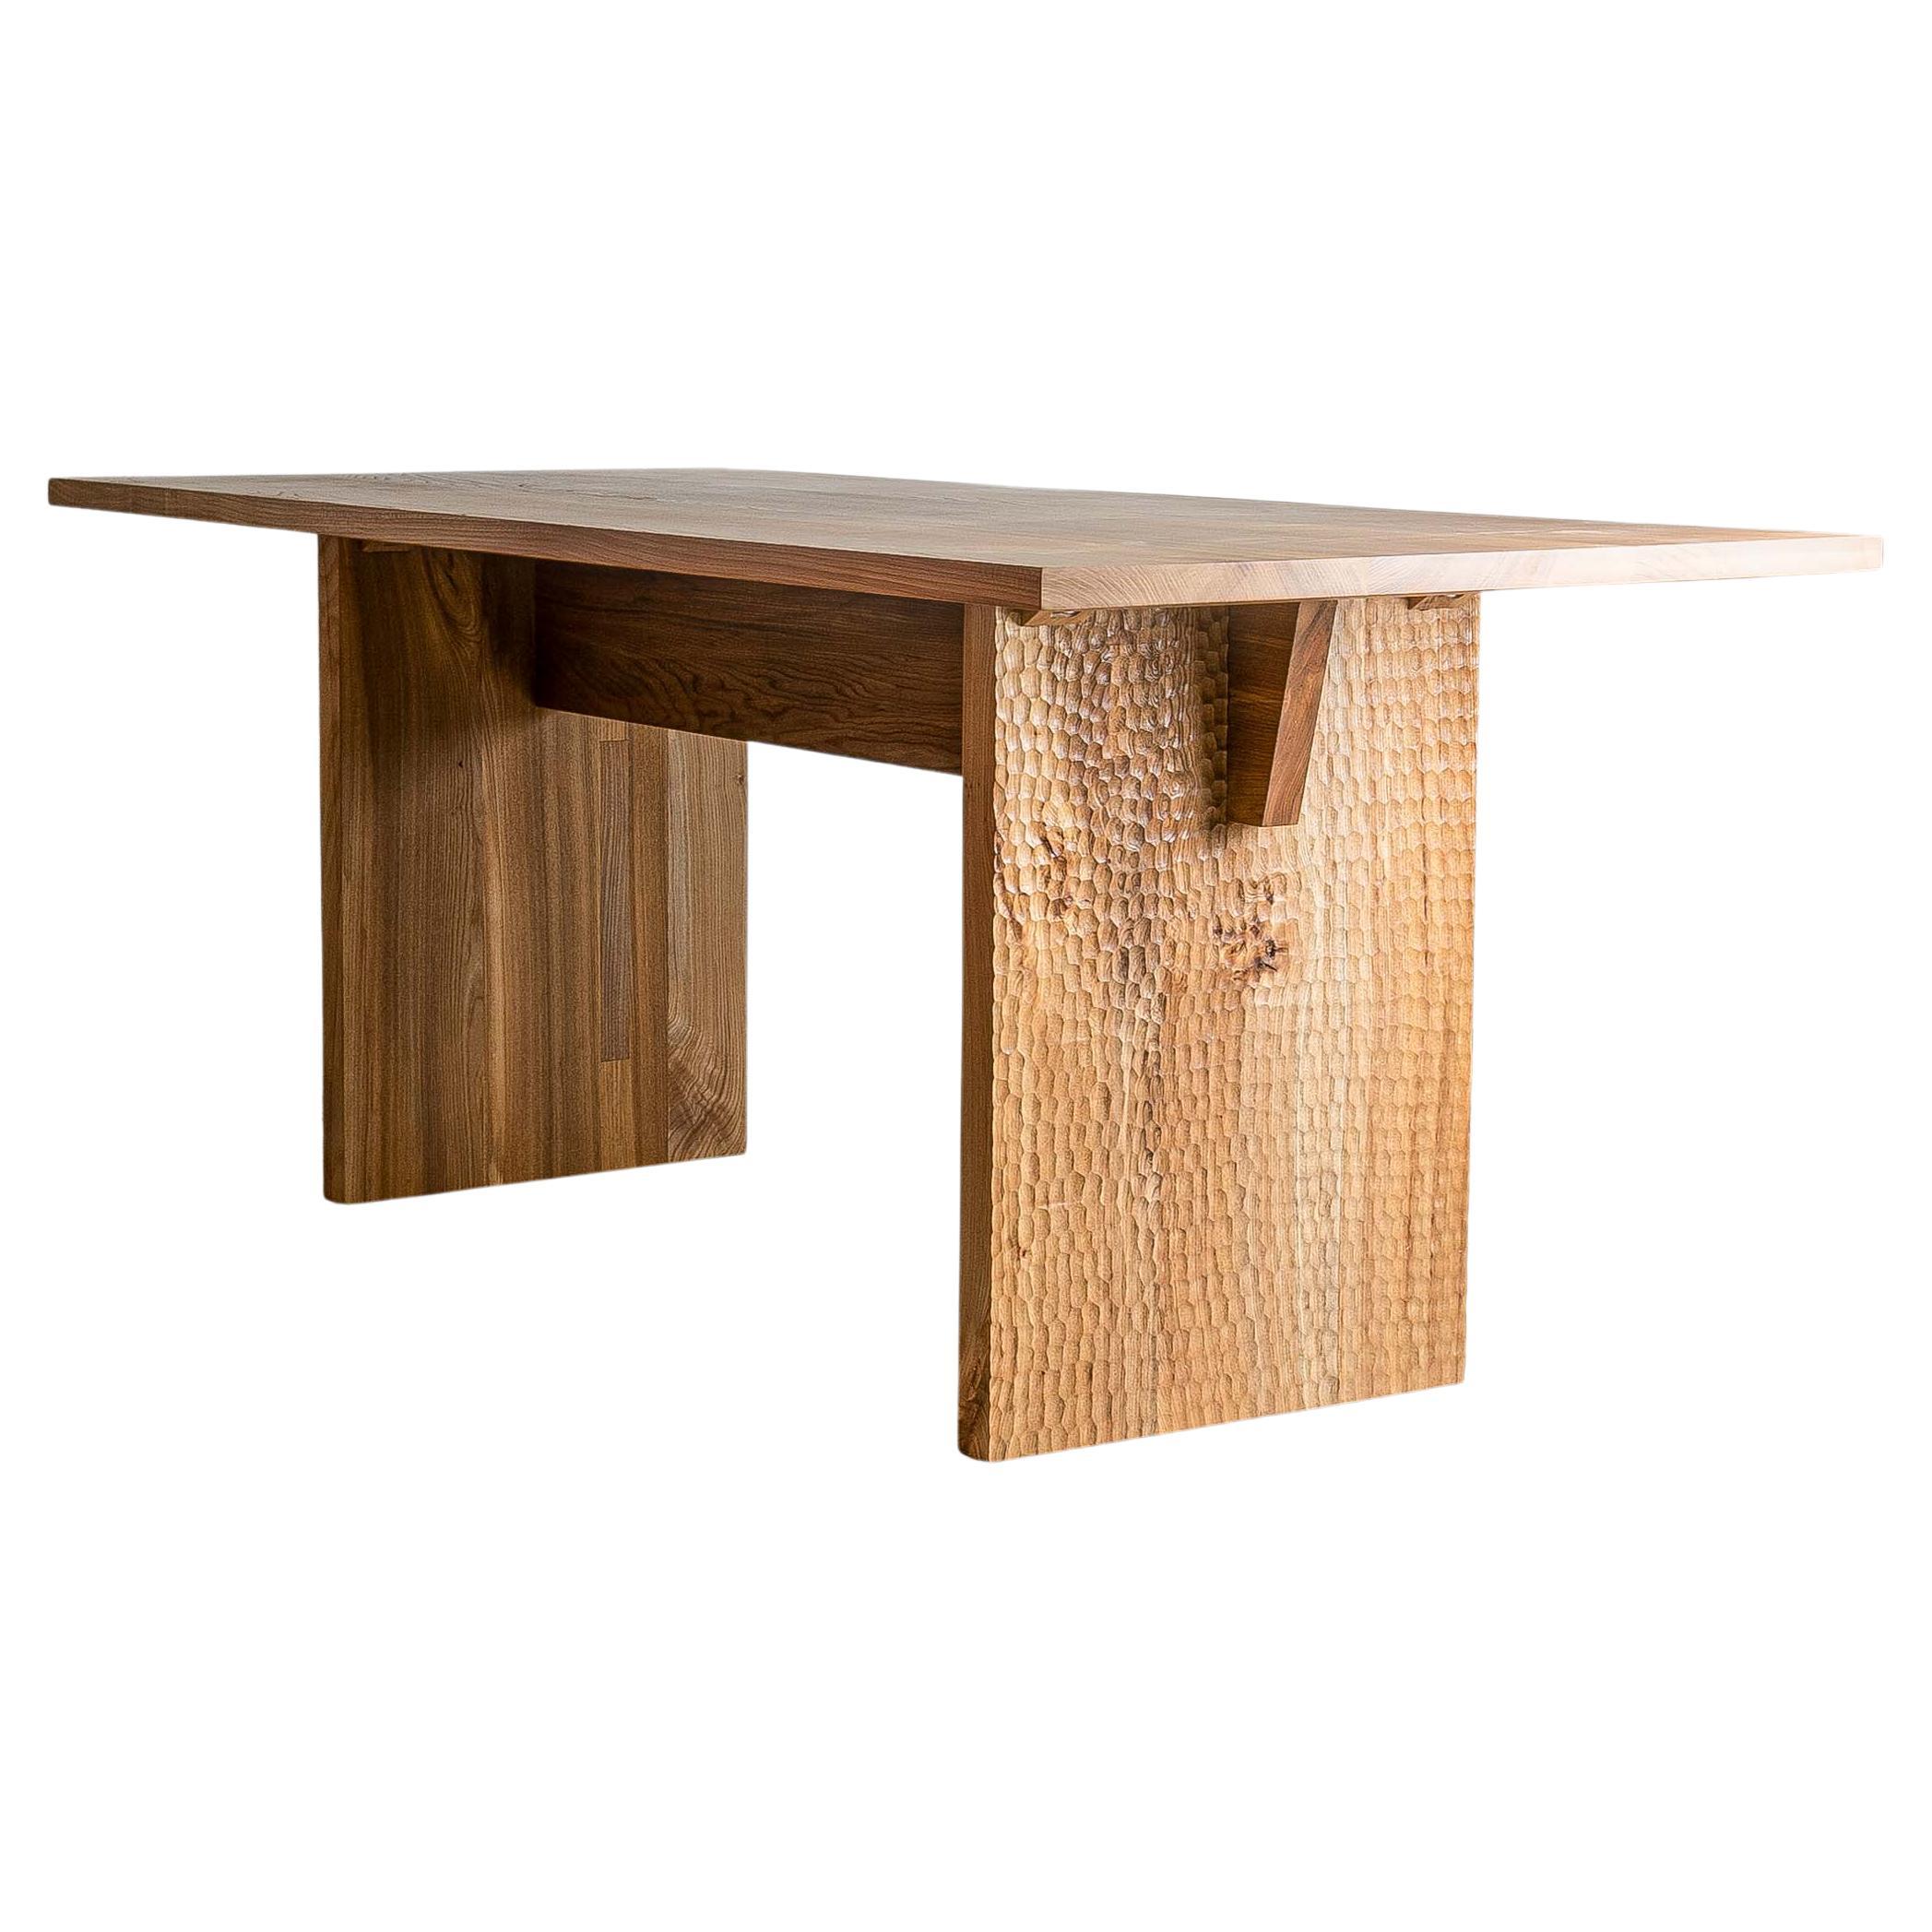 Leto Elm Dining Table, with Hand Carved Texturing, by Mythology